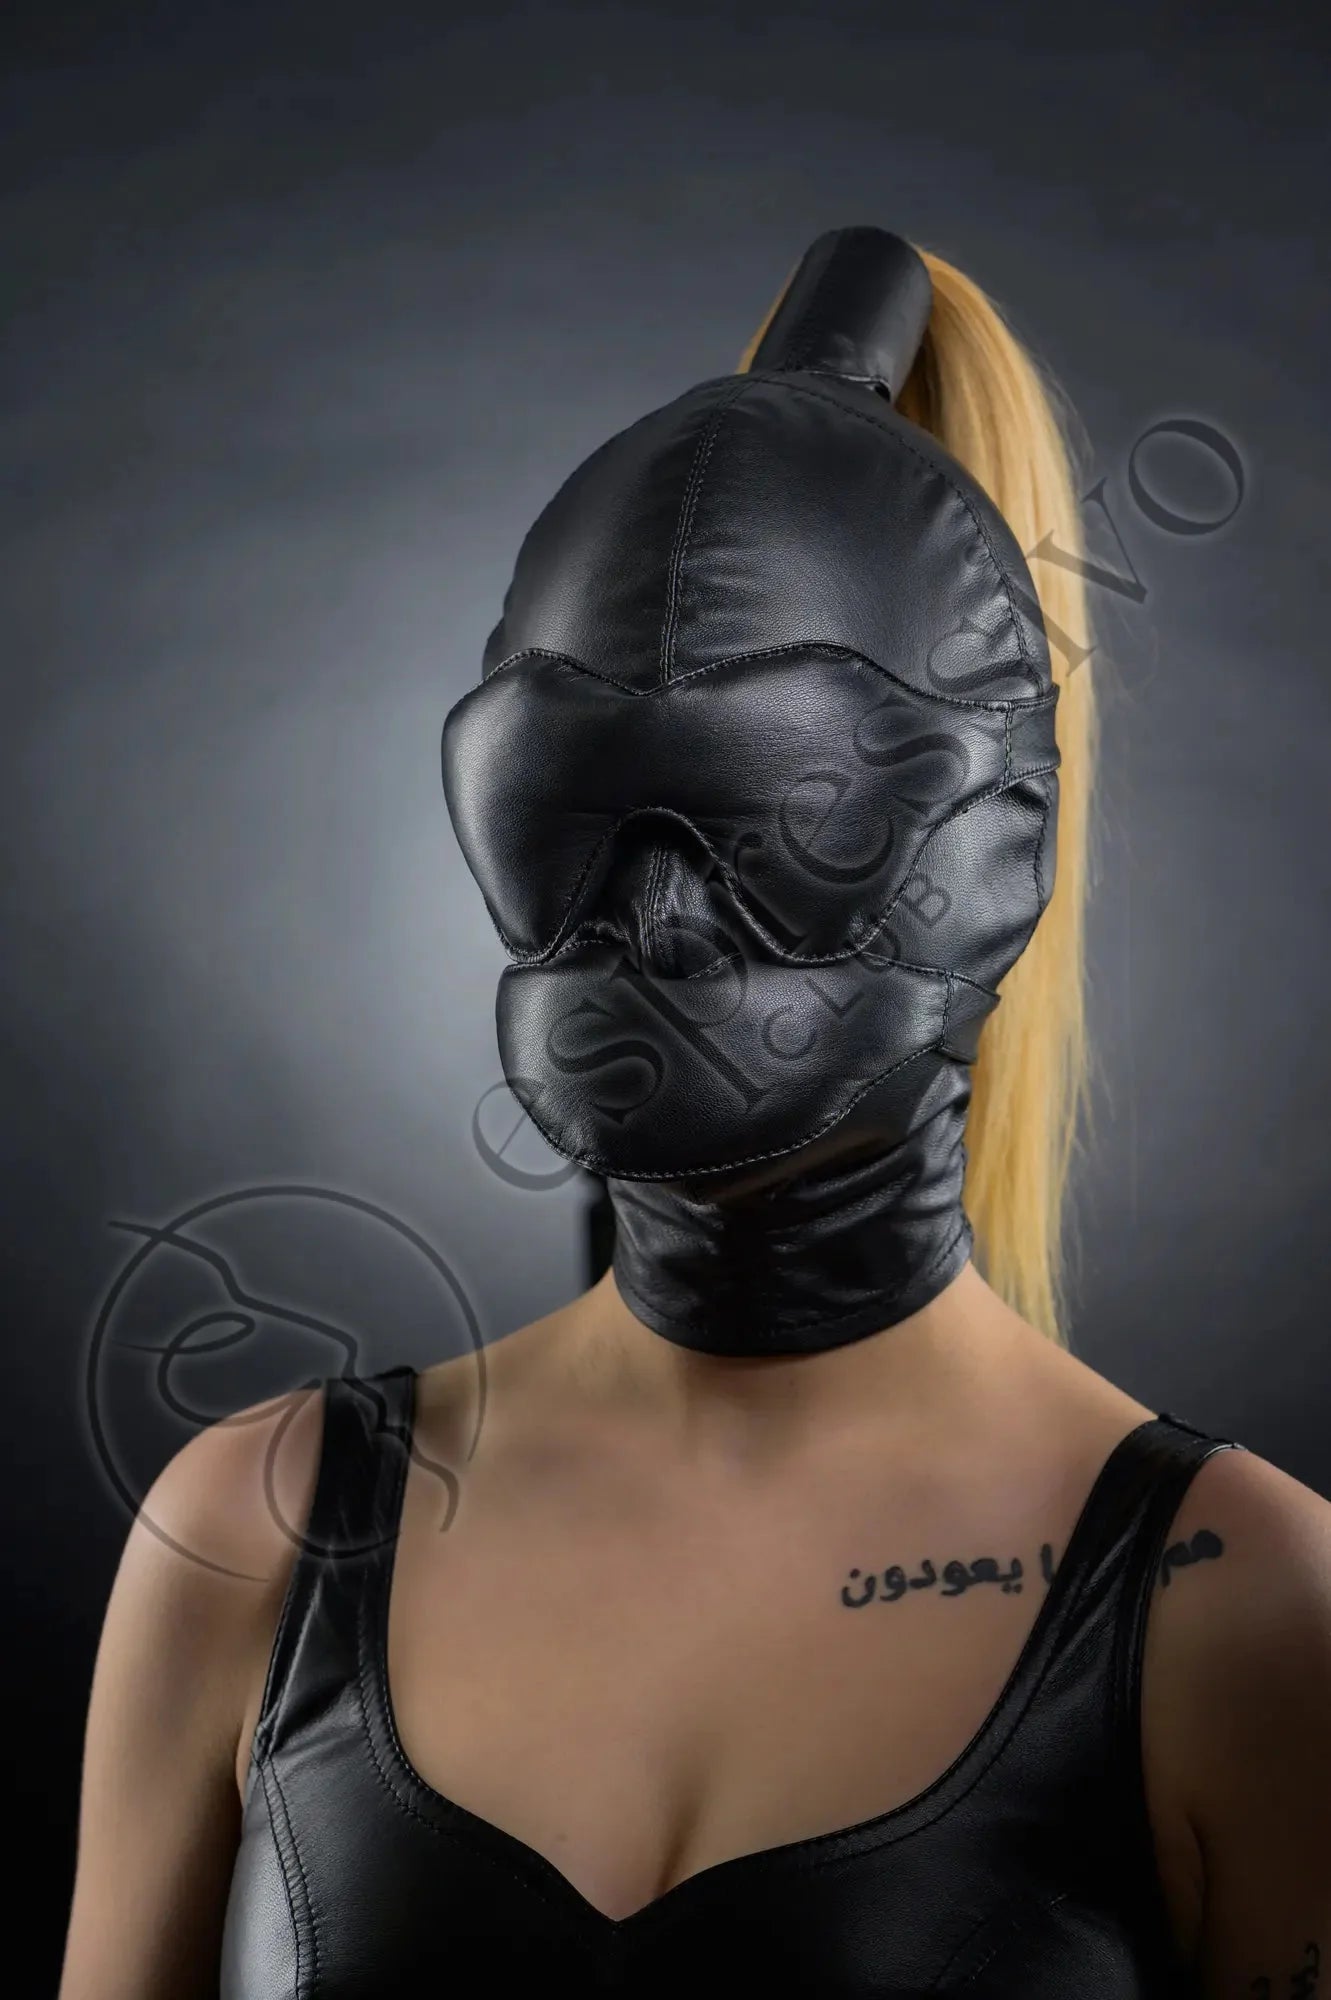 Real Leather BDSM Tight Ponytail Hood with Blindfold & Muffle Gag Mask - Muffle Gag On